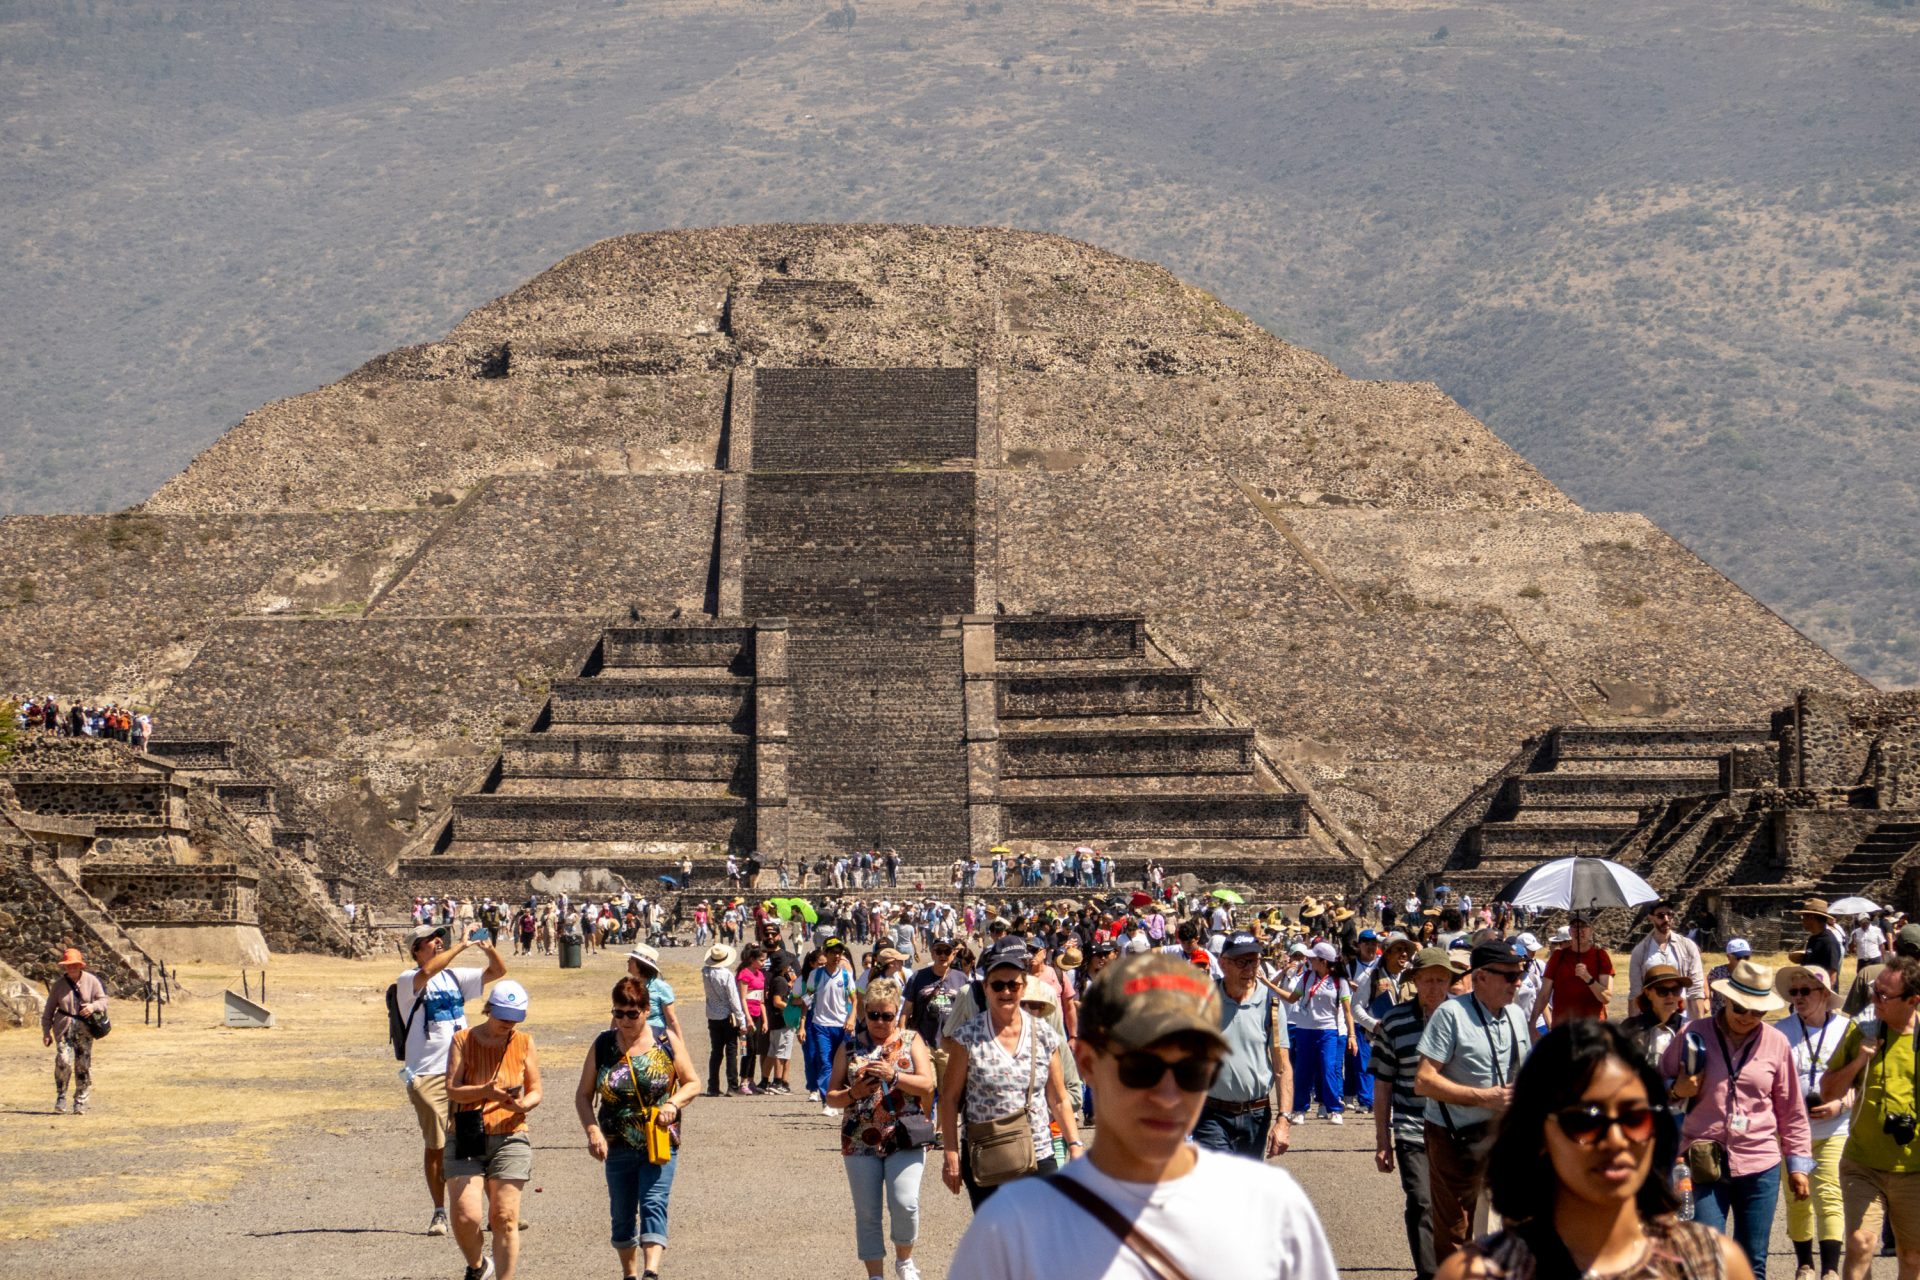 The collapse of Teotihuacán: the end of the city of the gods